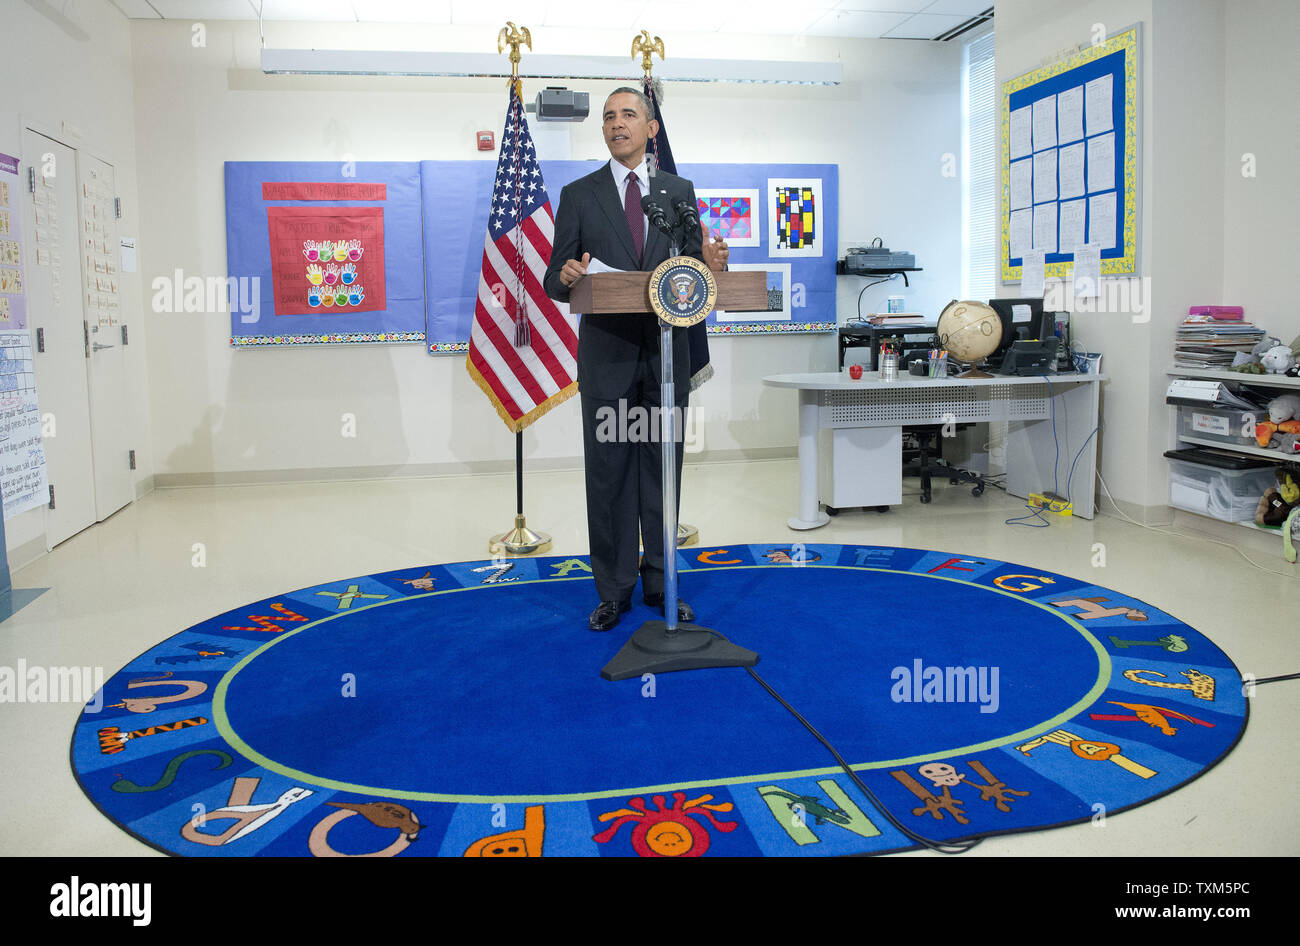 United States President Barack Obama makes remarks on the FY 2015 budget at Powell Elementary School in Washington, D.C. on Tuesday, March 4, 2014. The President also took a question on the situation in the Ukraine. .Credit: Ron Sachs / Pool via CNP Stock Photo